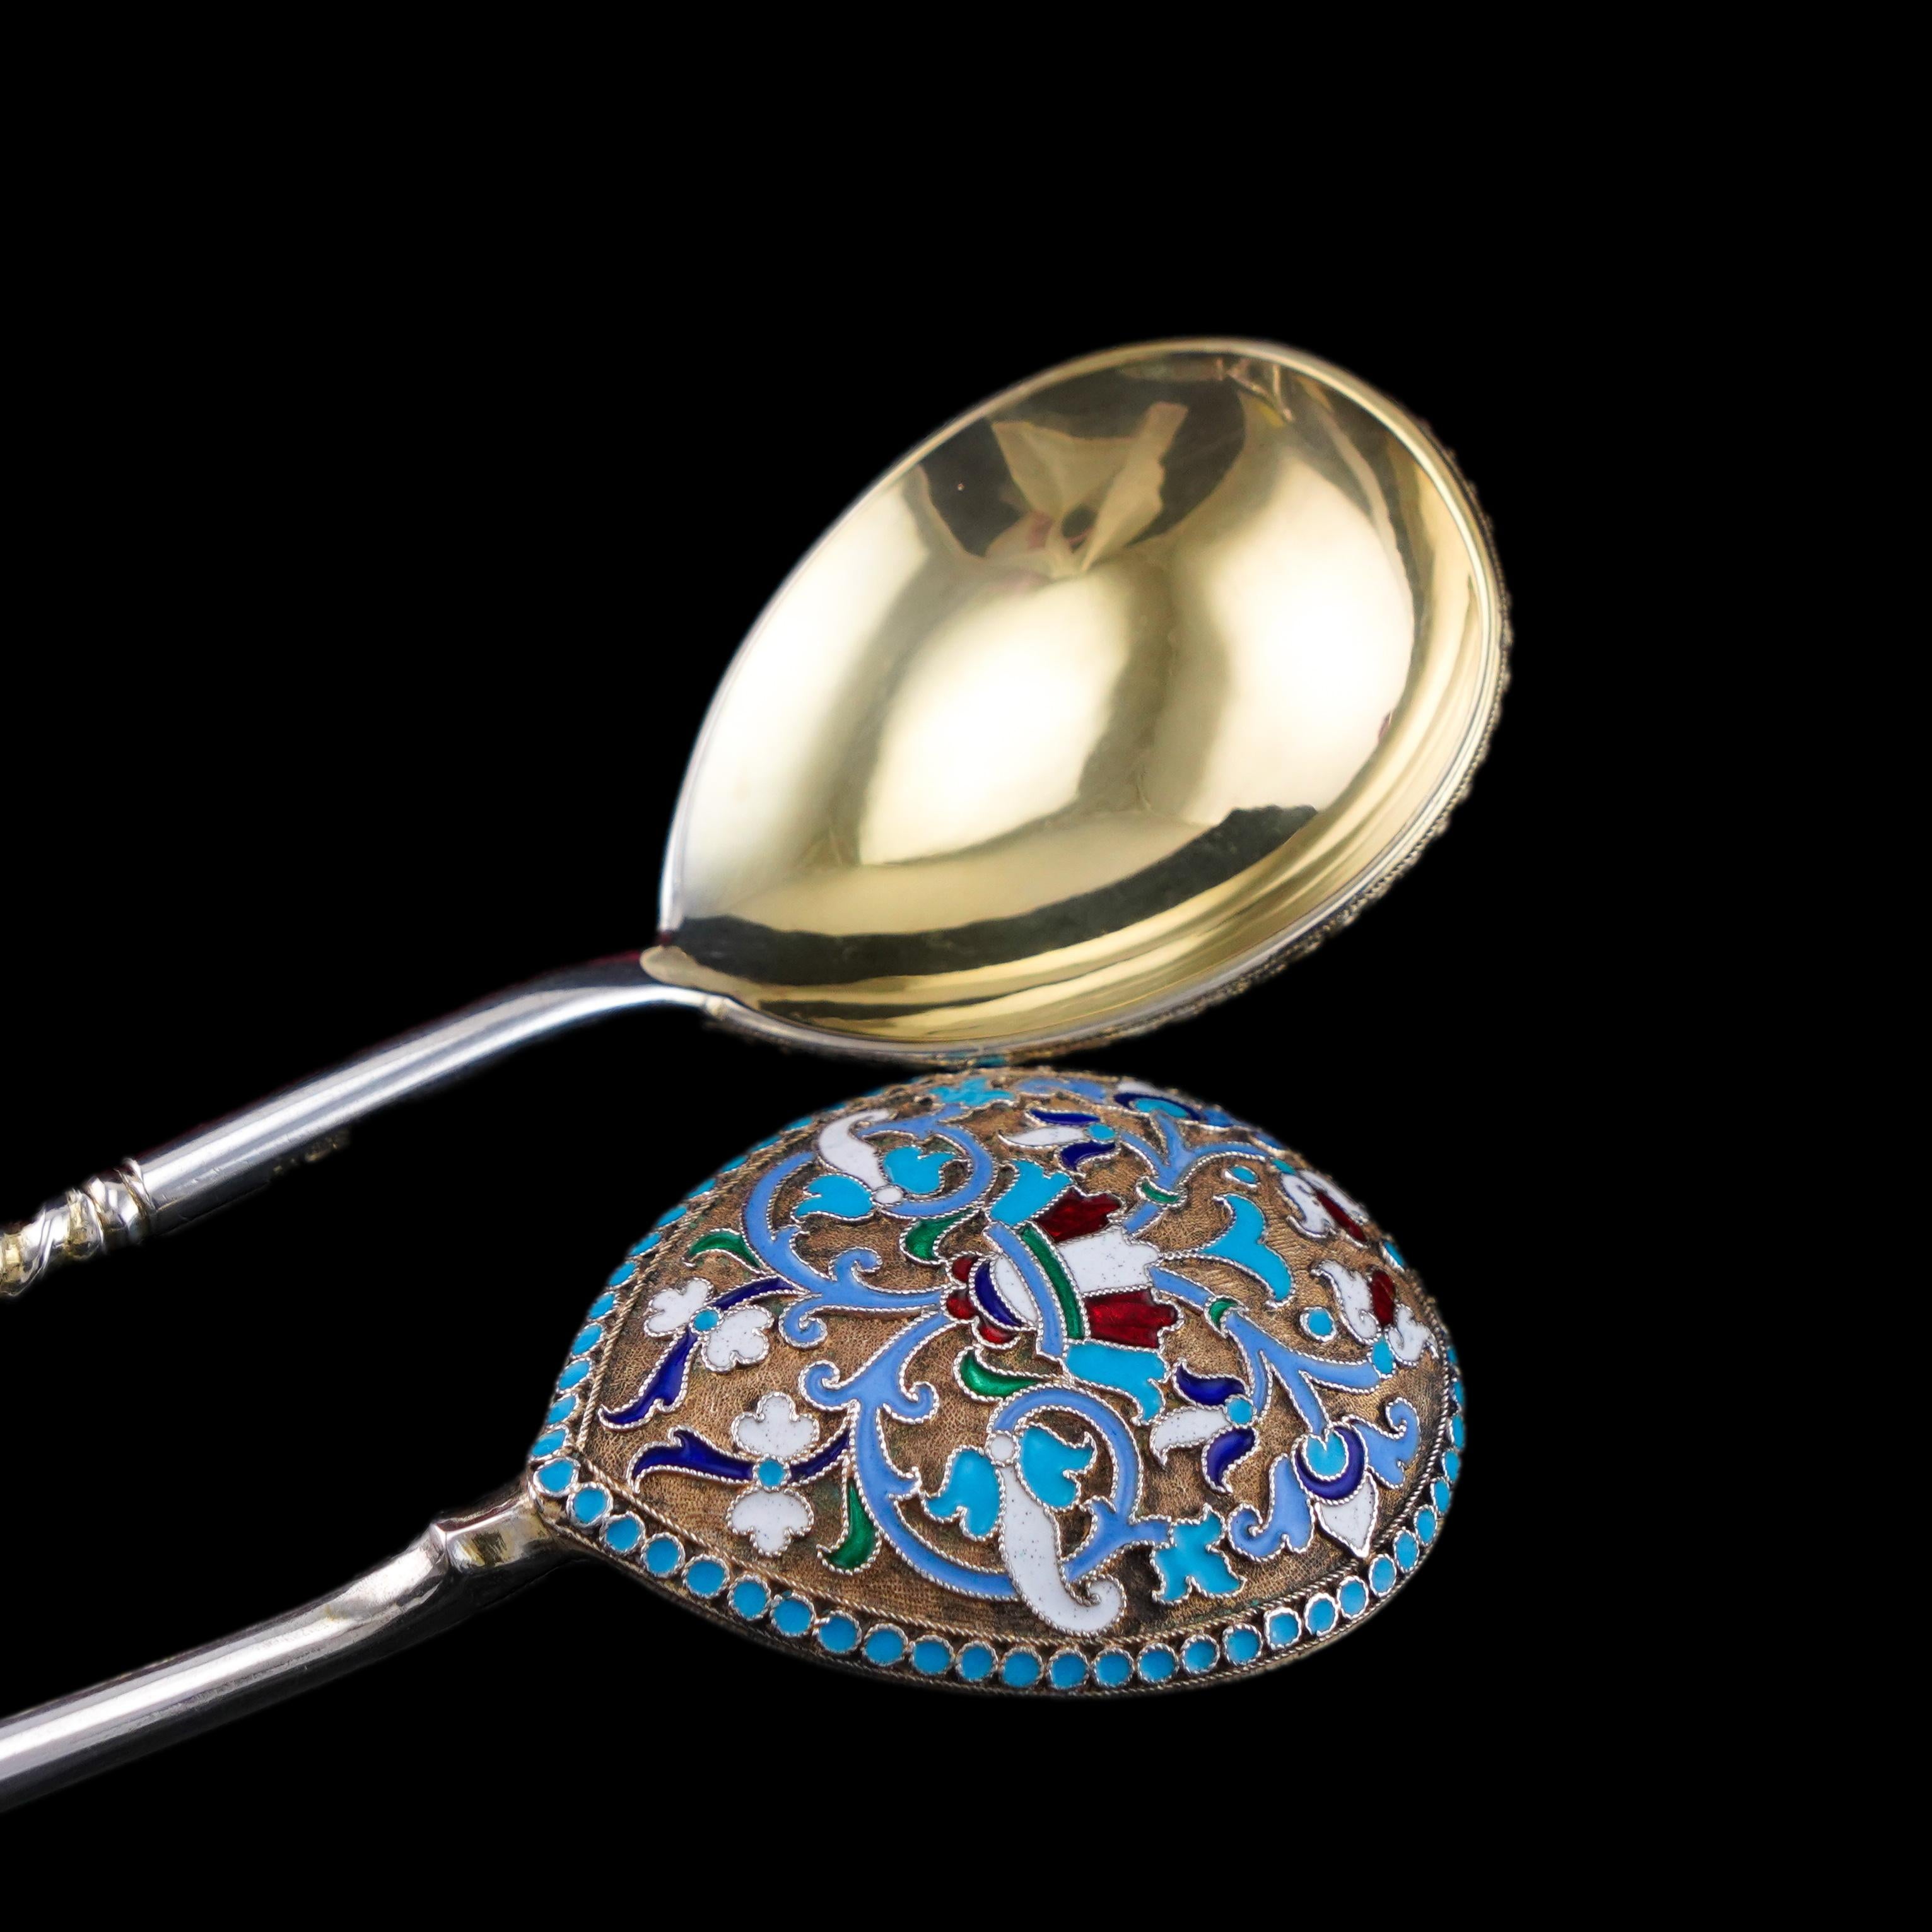 Antique Imperial Russian Solid Silver Spoons with Cloisonne Enamel c.1882 For Sale 10